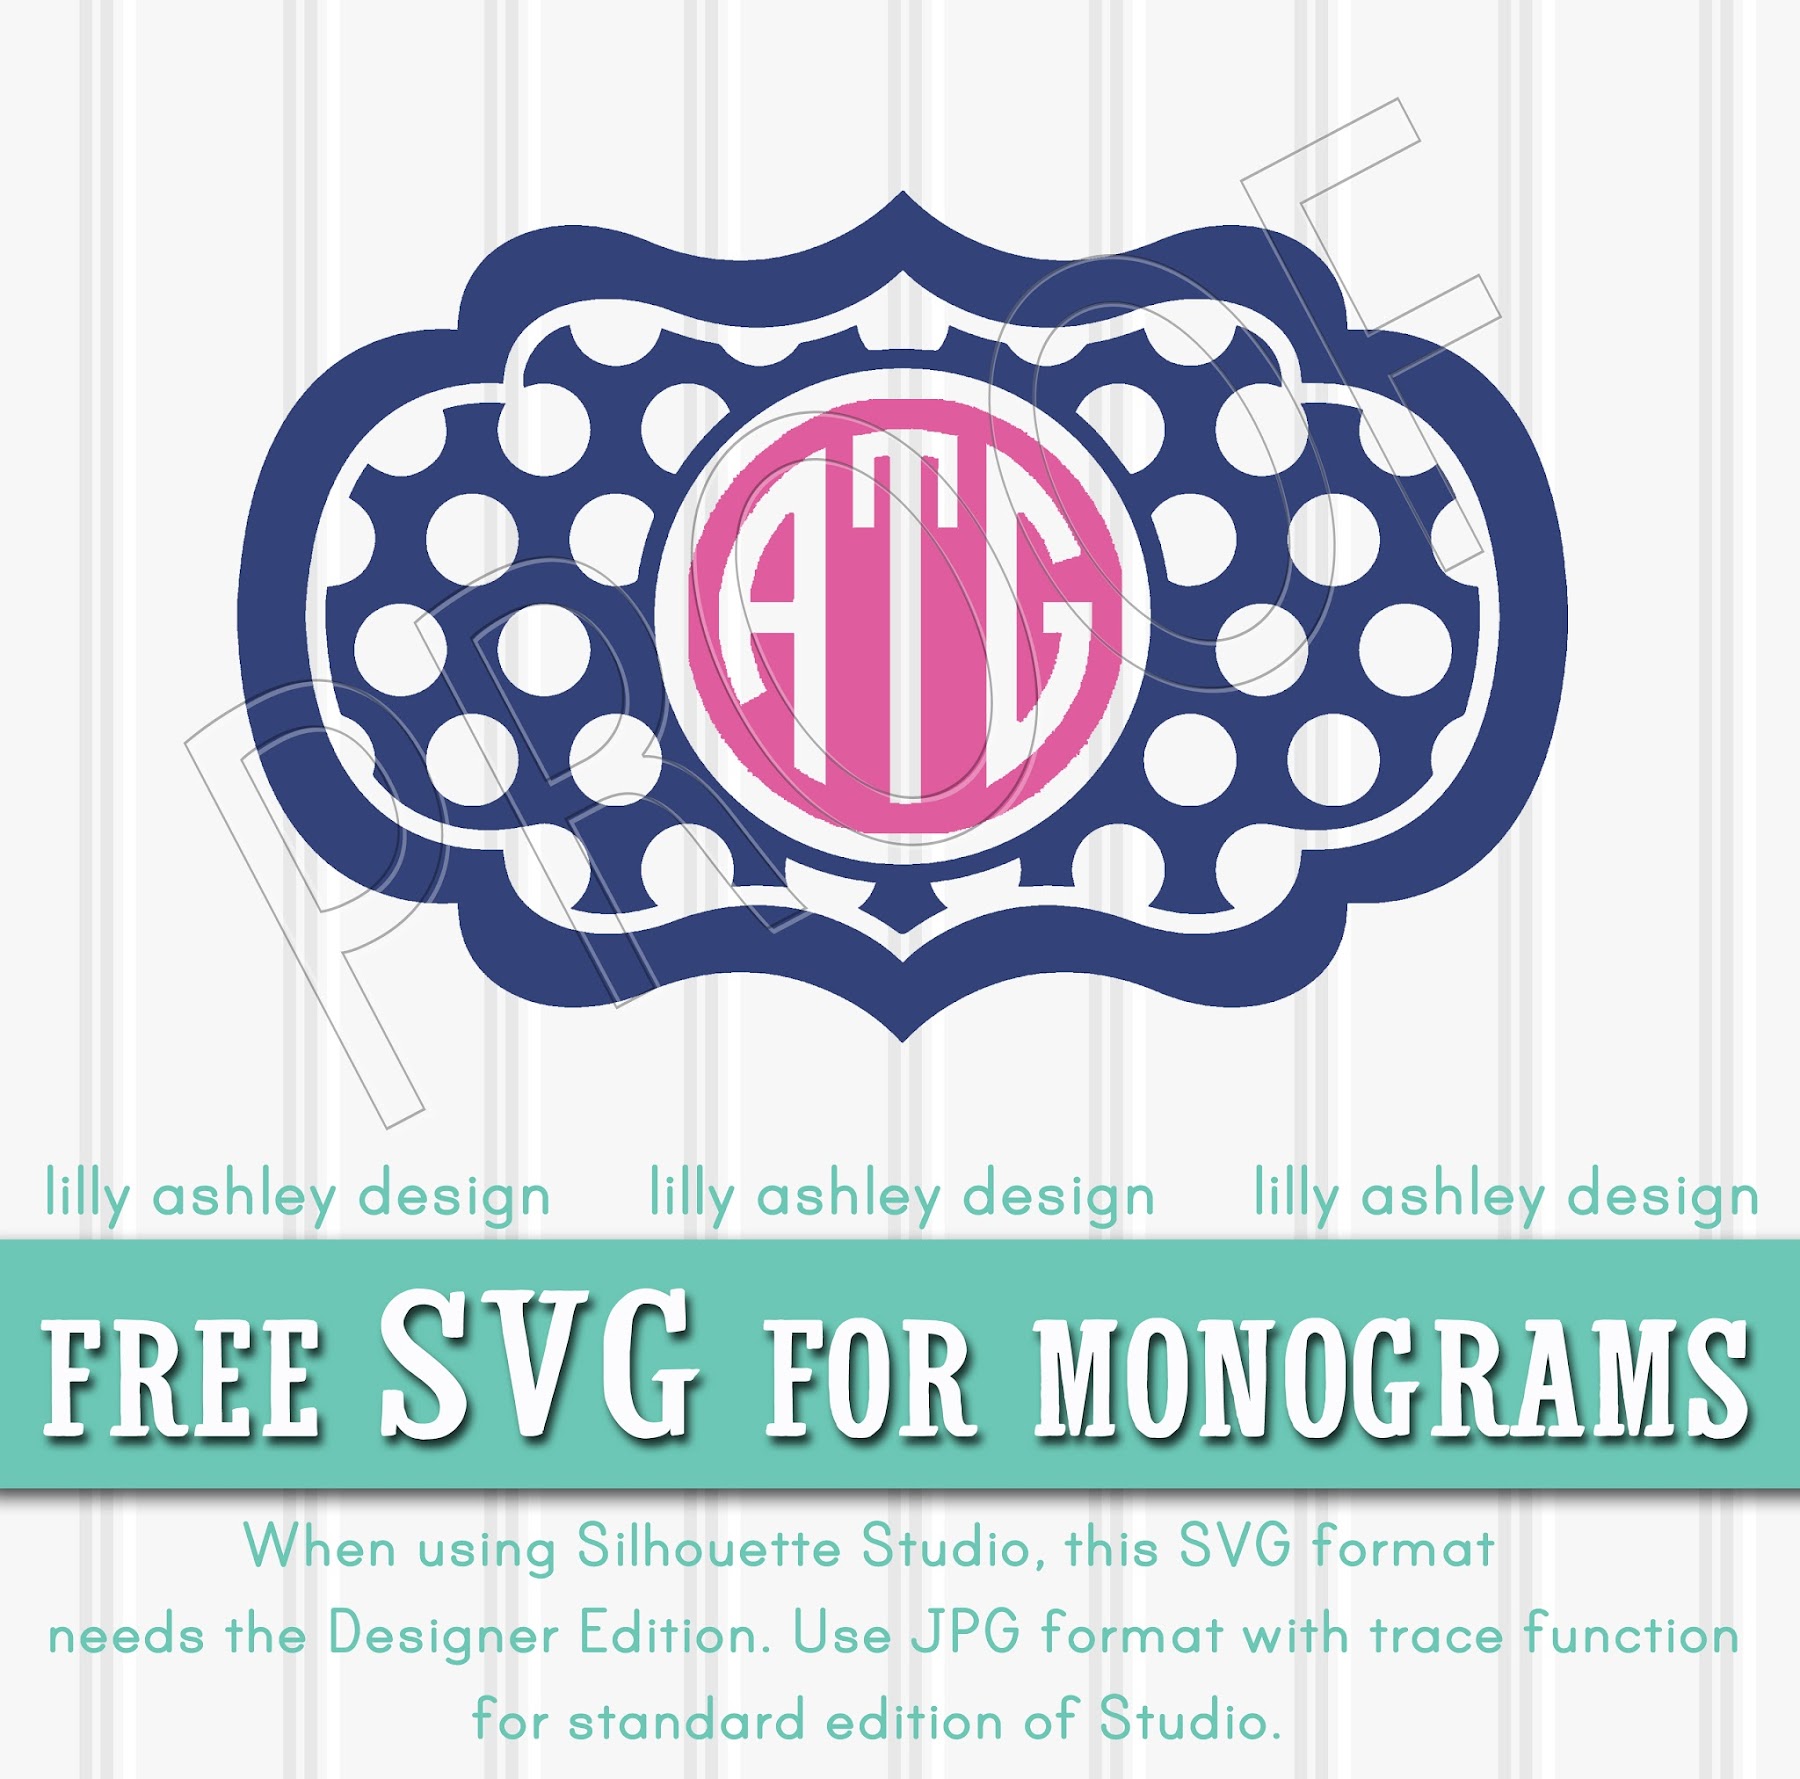 Download Free Svg File Creator - 70+ Popular SVG Design for Cricut, Silhouette and Other Machine